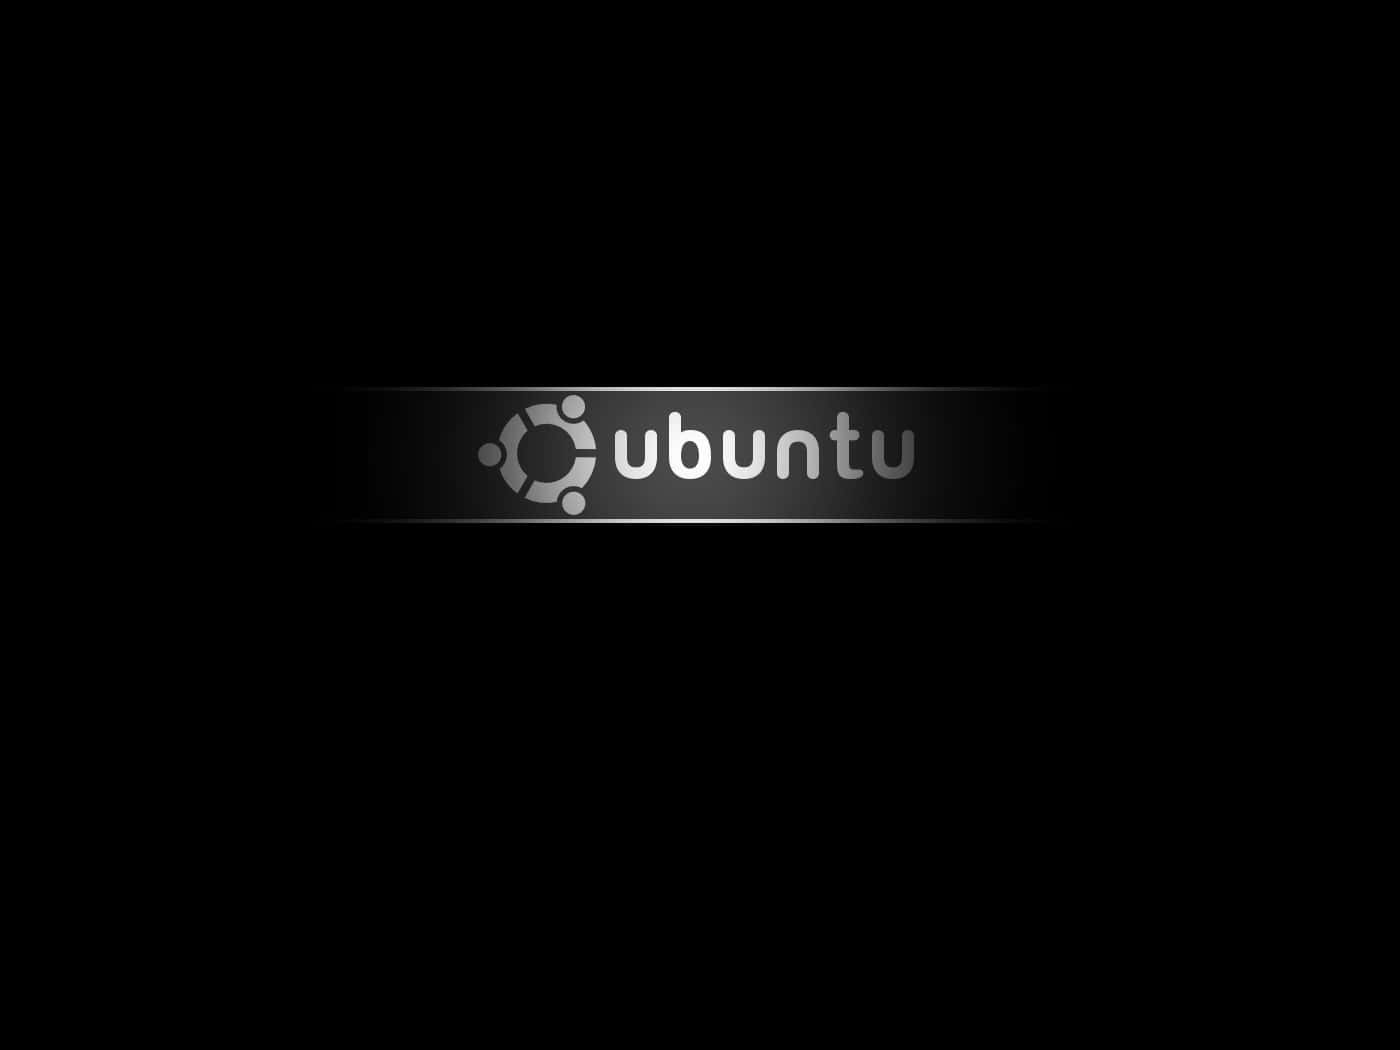 A Black Background With The Word Ubuntu On It